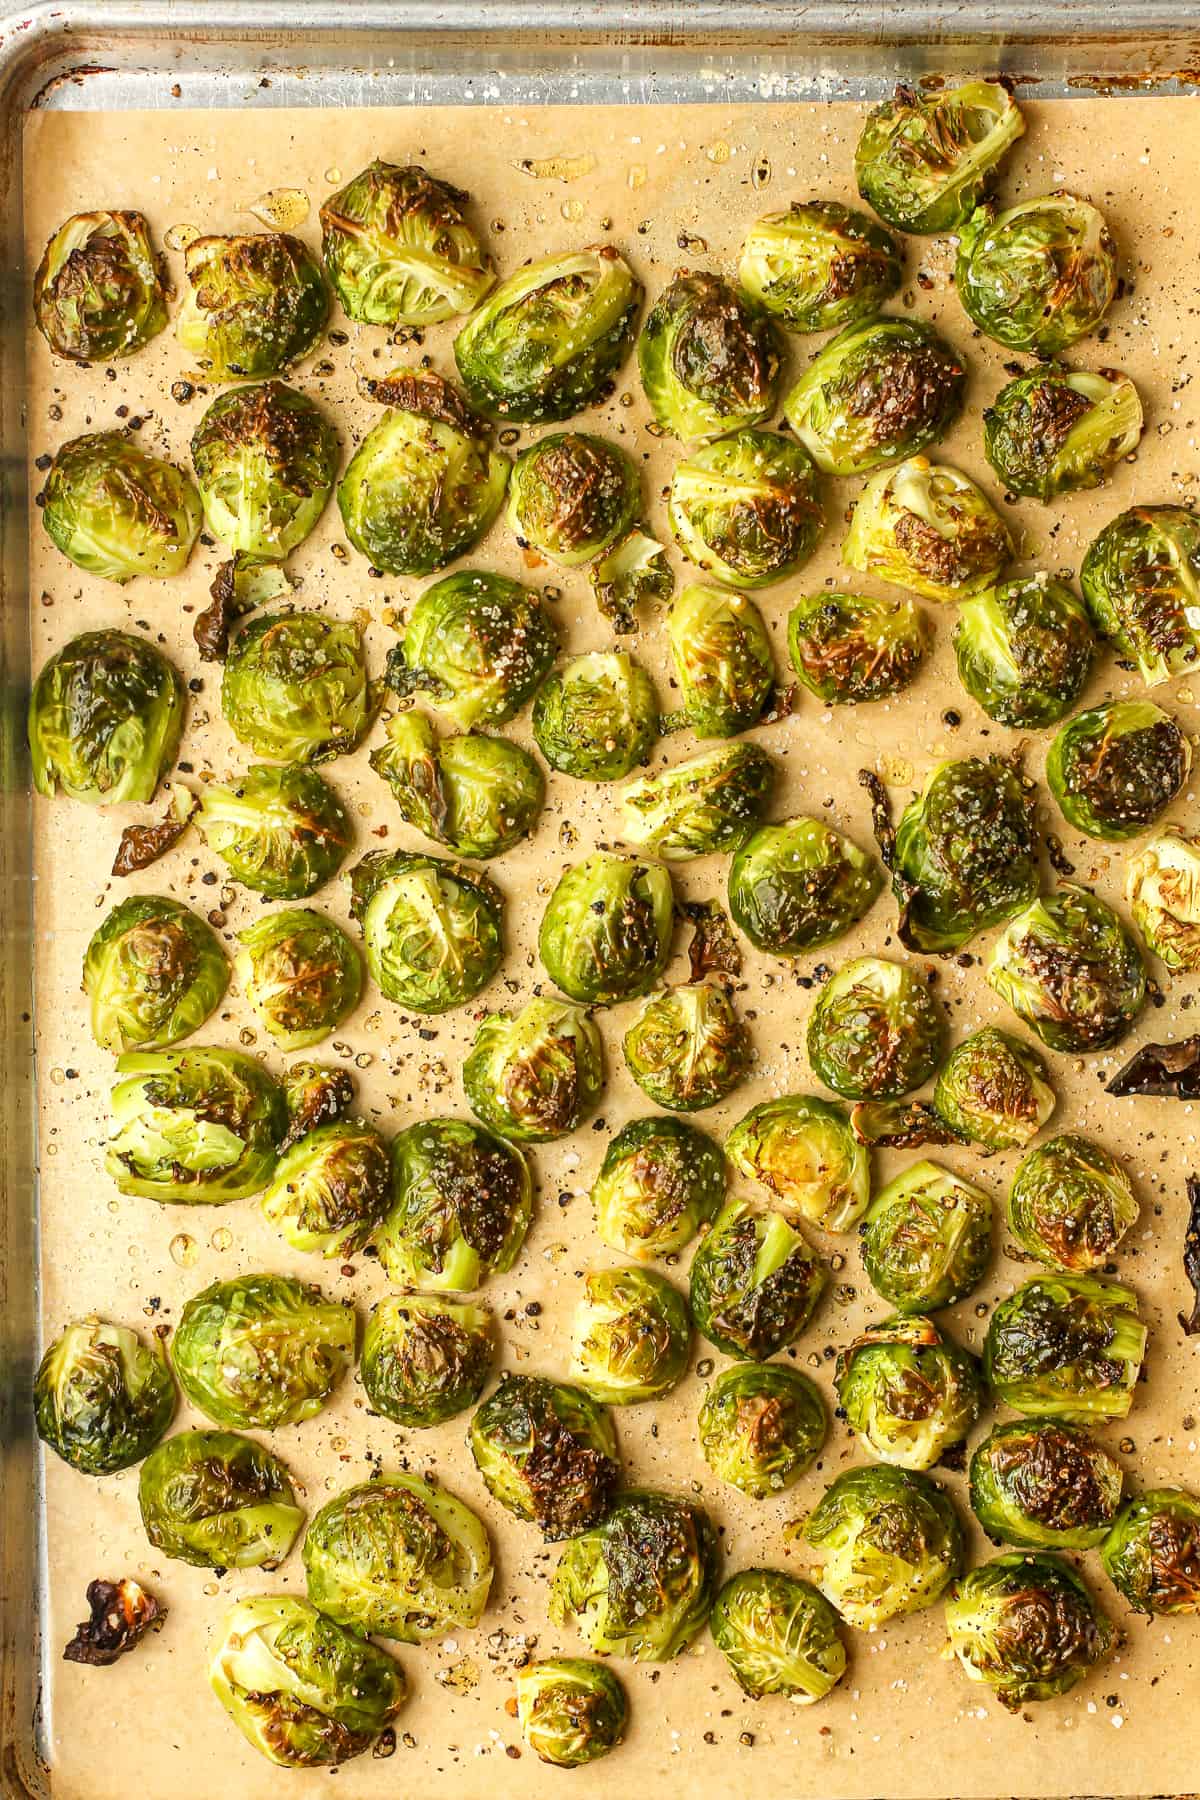 A pan of roasted brussels sprouts.